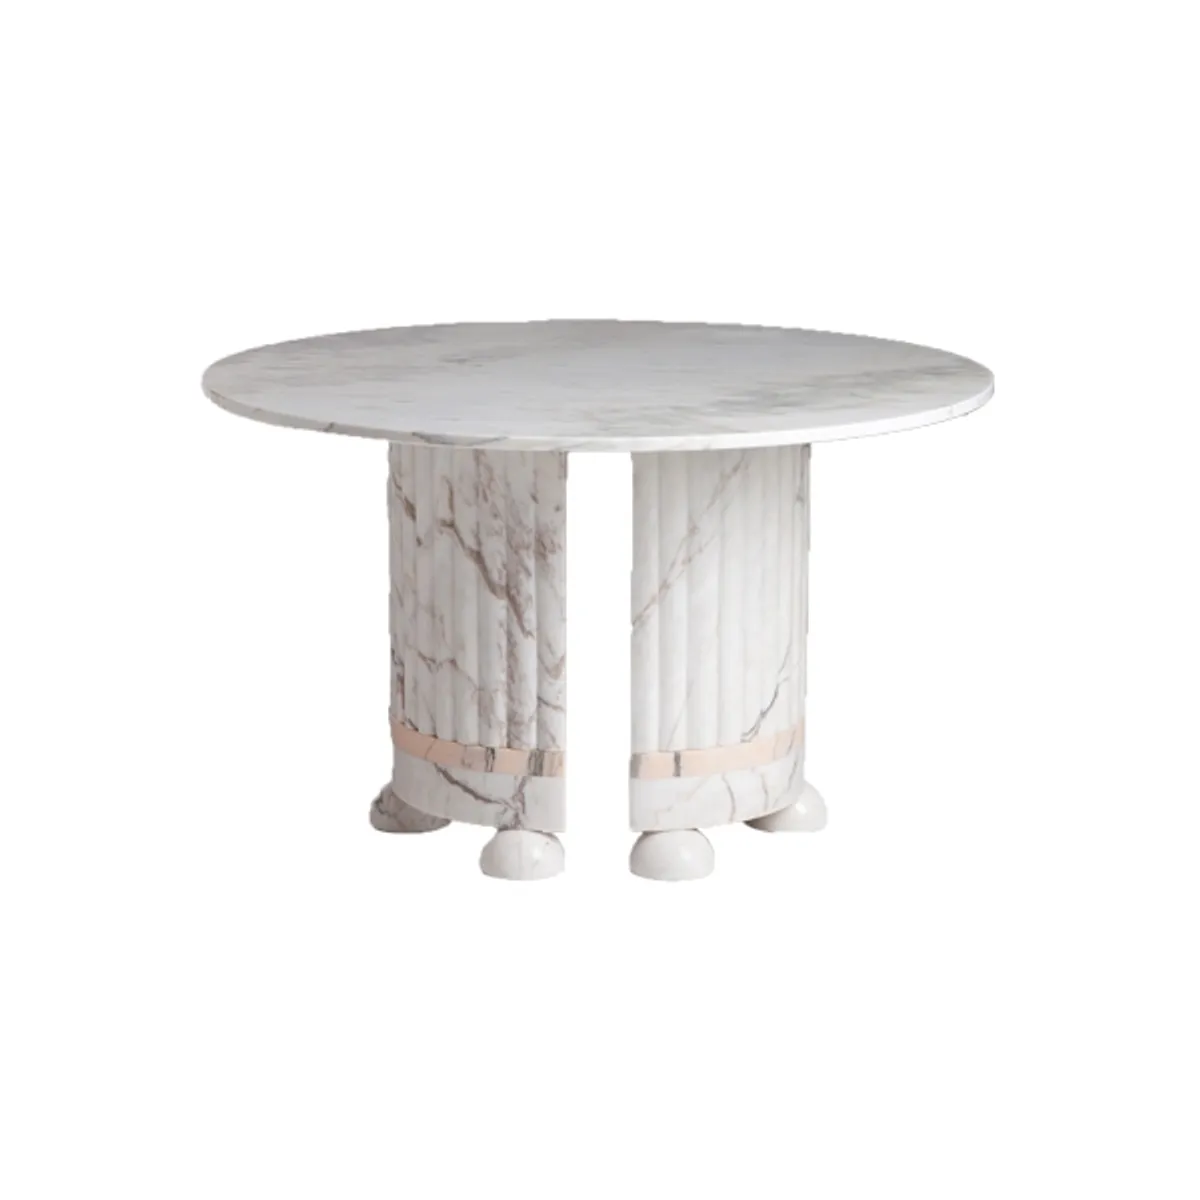 Unica table Inside Out Contracts2